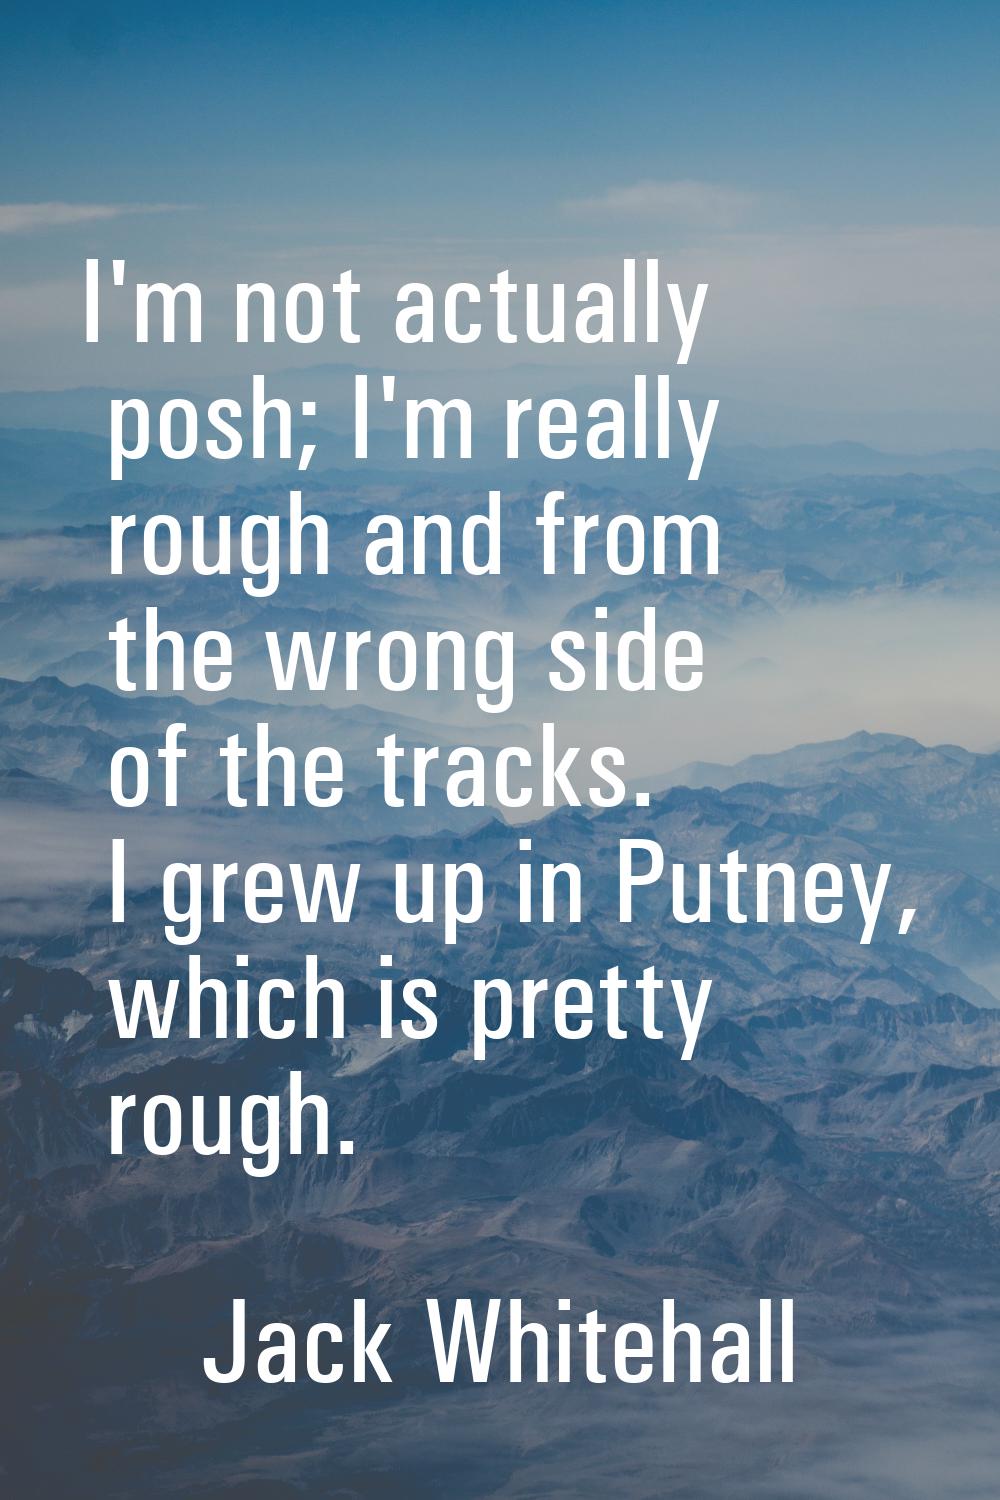 I'm not actually posh; I'm really rough and from the wrong side of the tracks. I grew up in Putney,